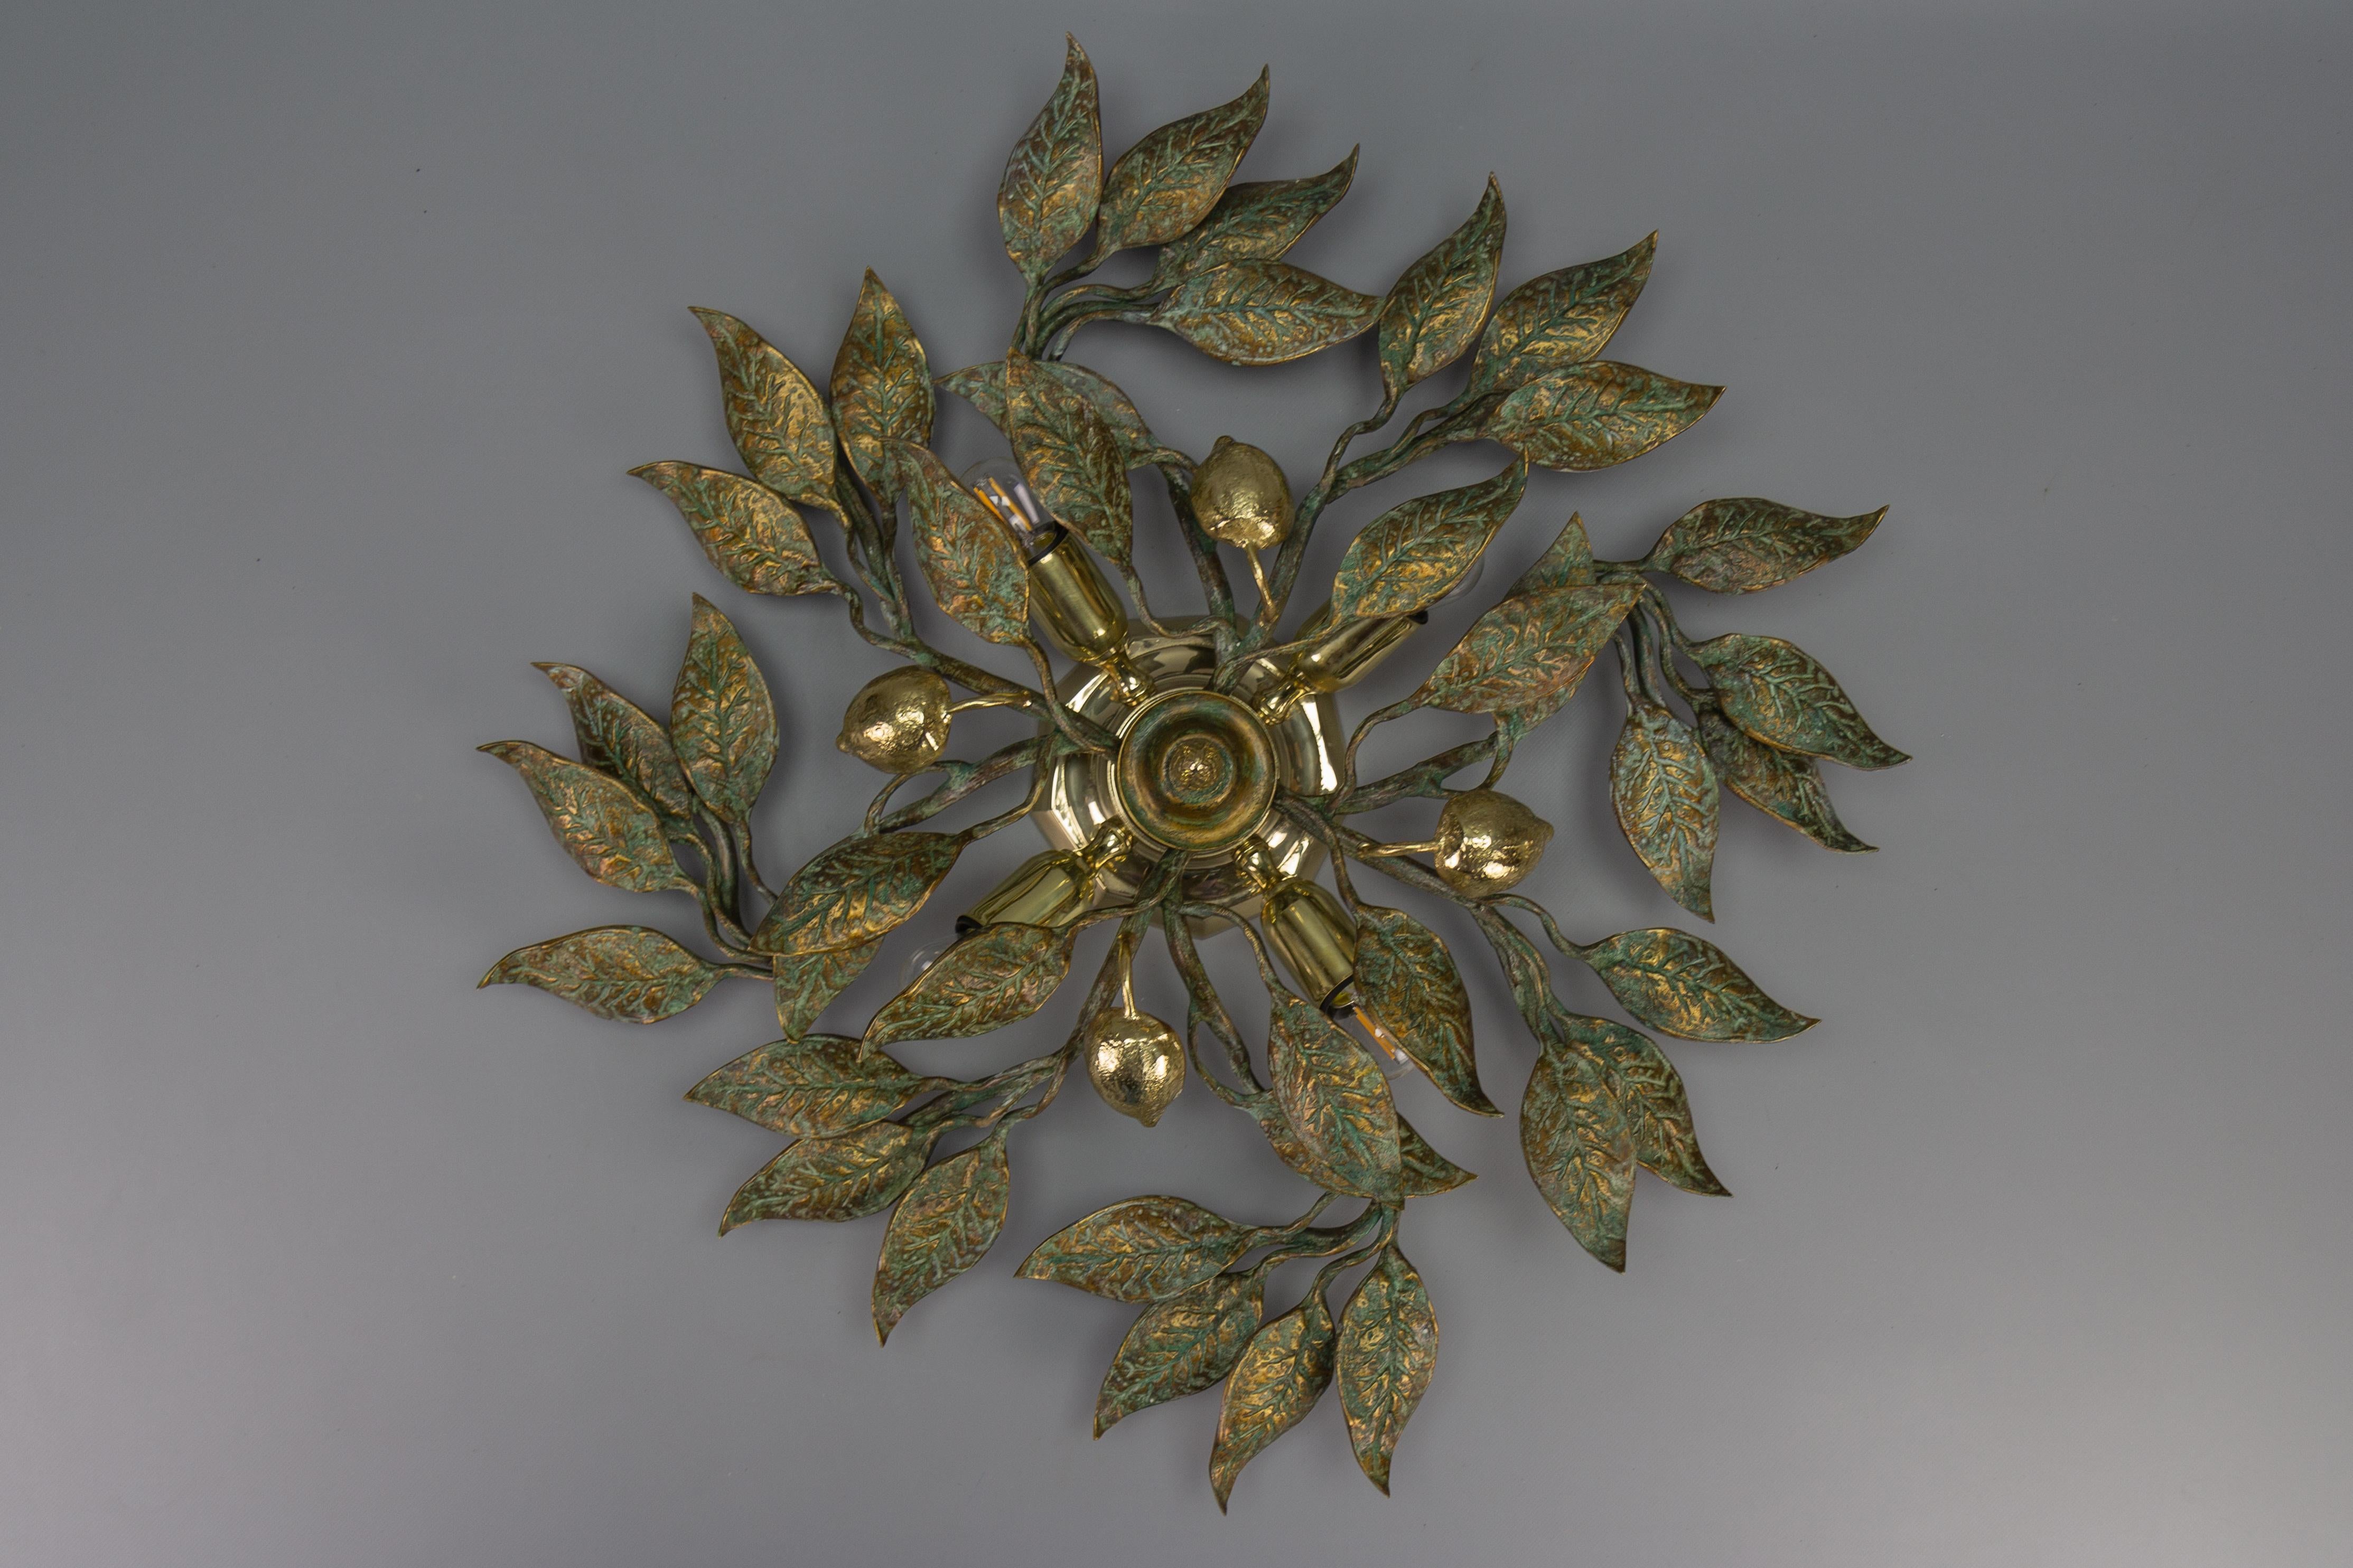 Large patinated brass foliage sunburst flush mount or sconce attributed to Hans Möller, Germany, circa the 1970s.
An impressive, large, and highly decorative four-light sunburst-shaped foliage motif flush mount by Hans Möller; the manufacturer's and